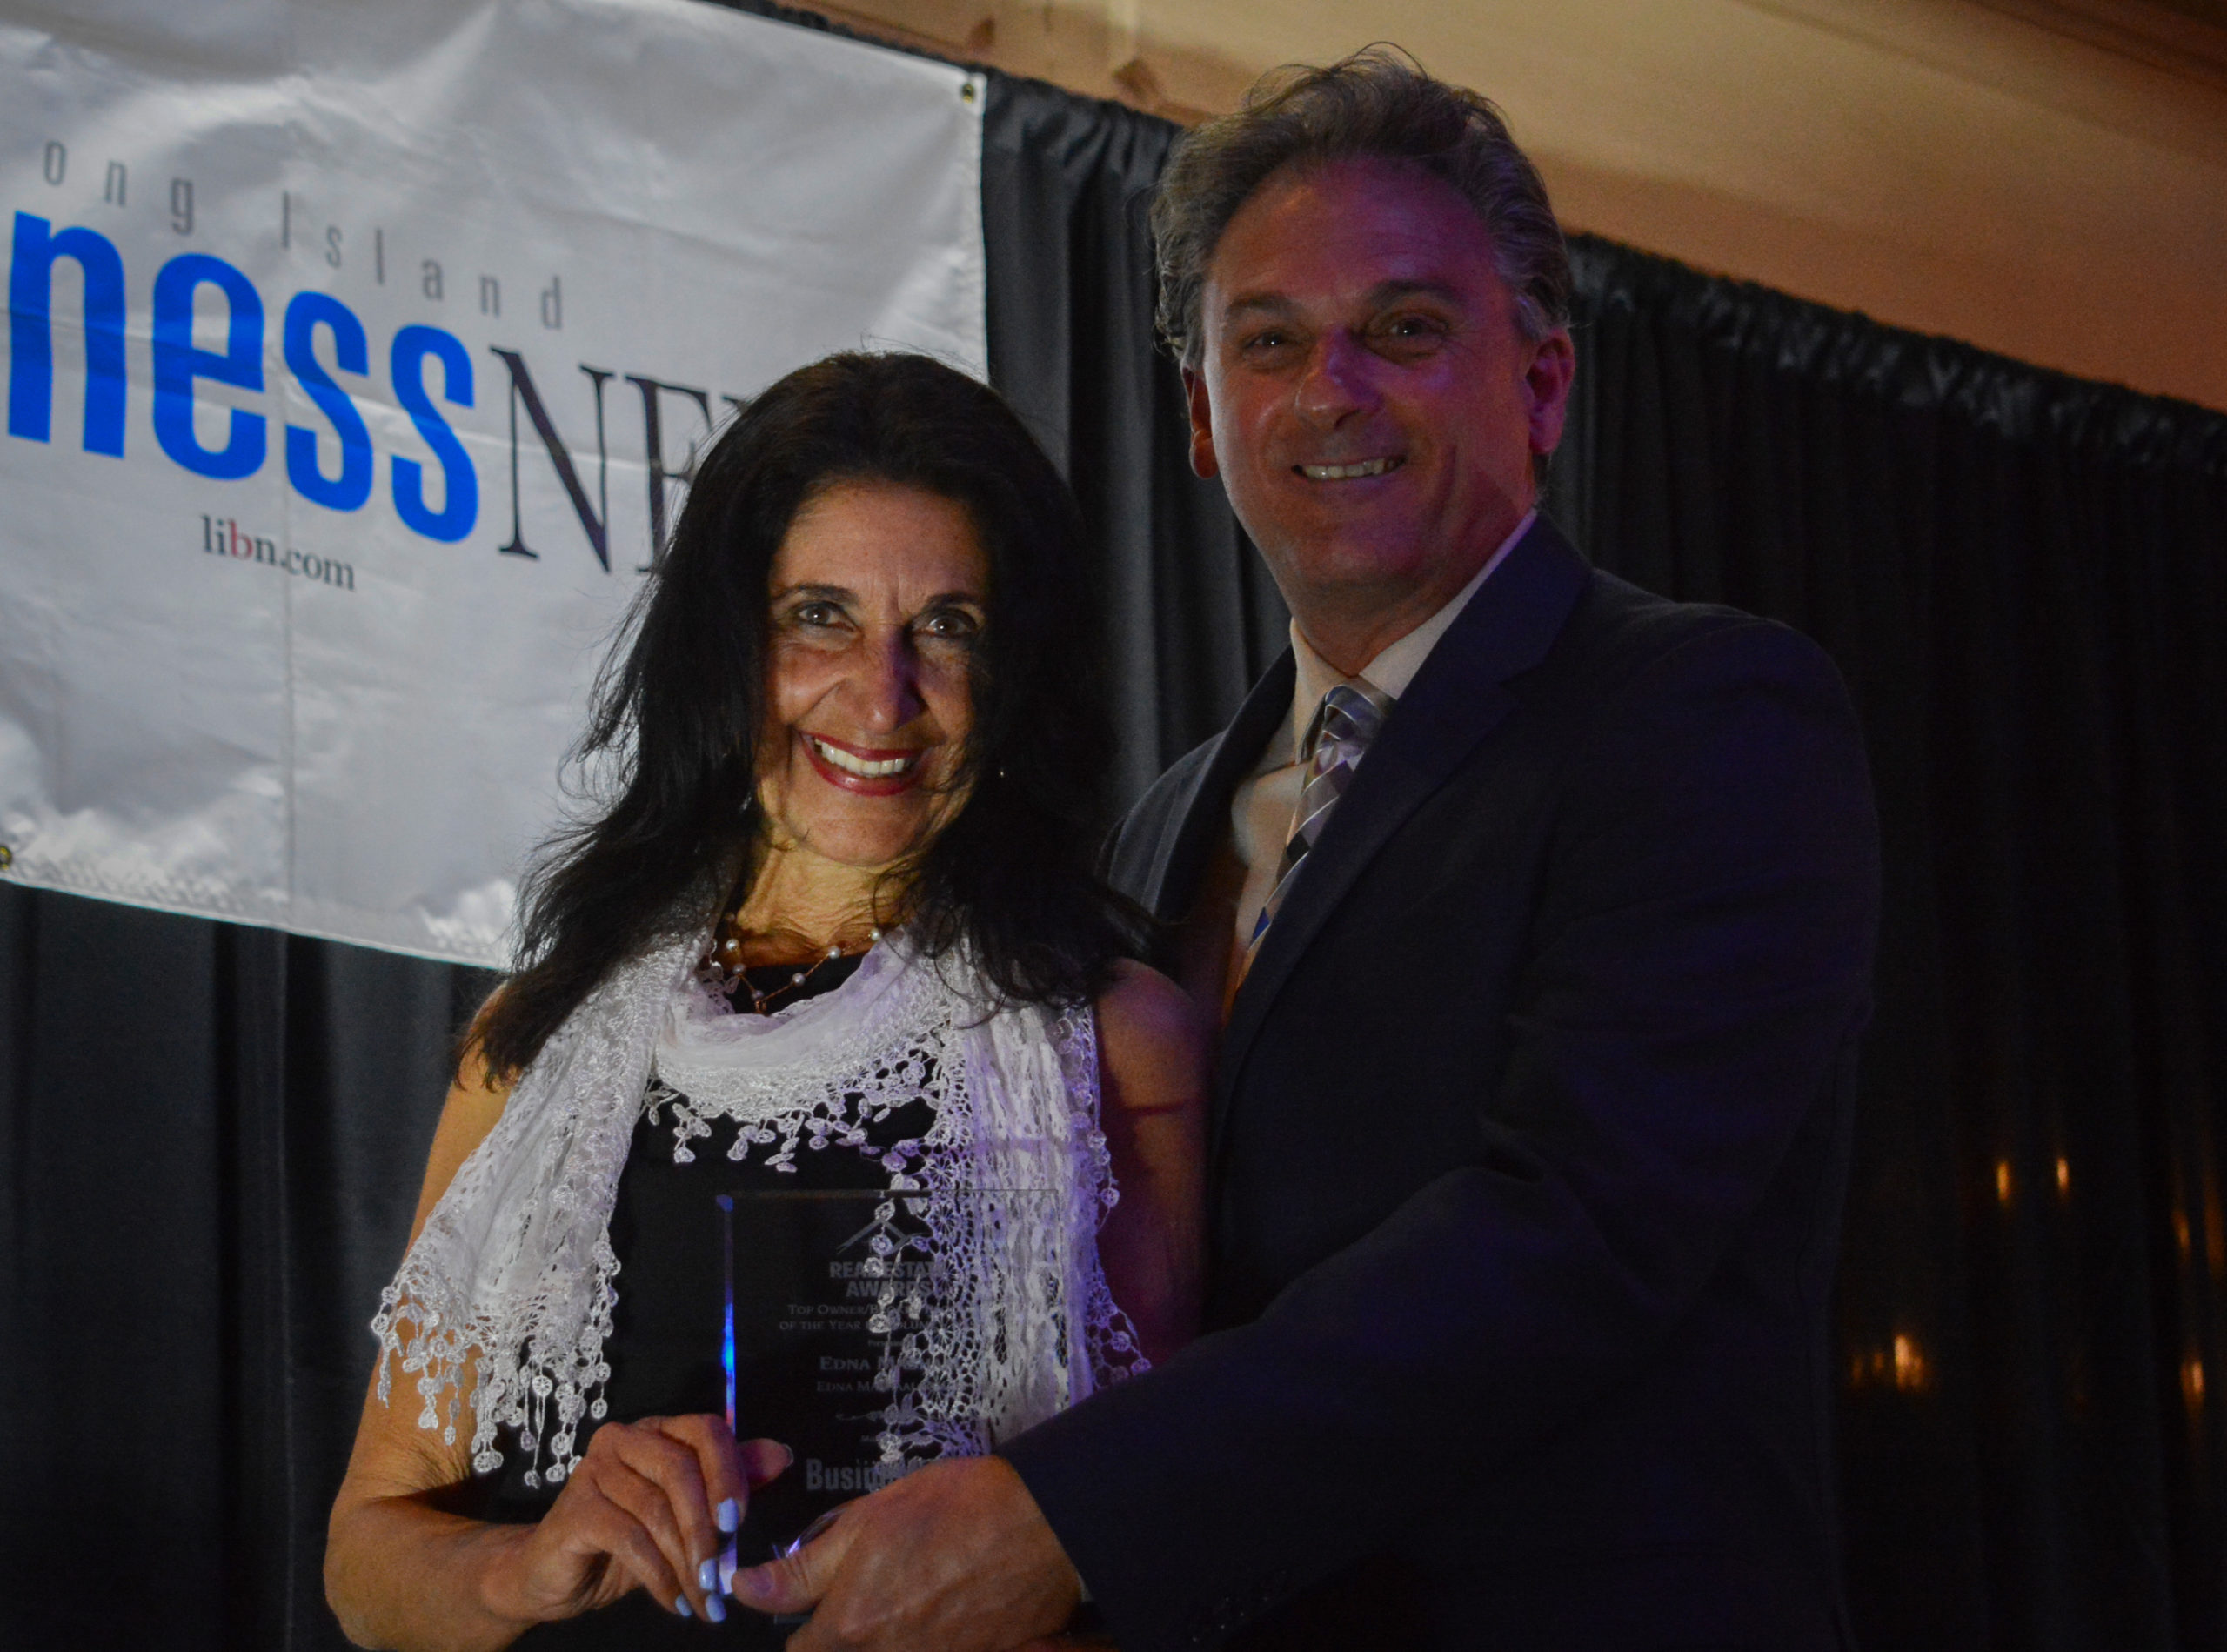 Edna Mashaal, the head of Edna Mashaal Realty, was honored by Long Island Business News for being the top owner/broker for production in Nassau County. (Photo by Janelle Clausen)